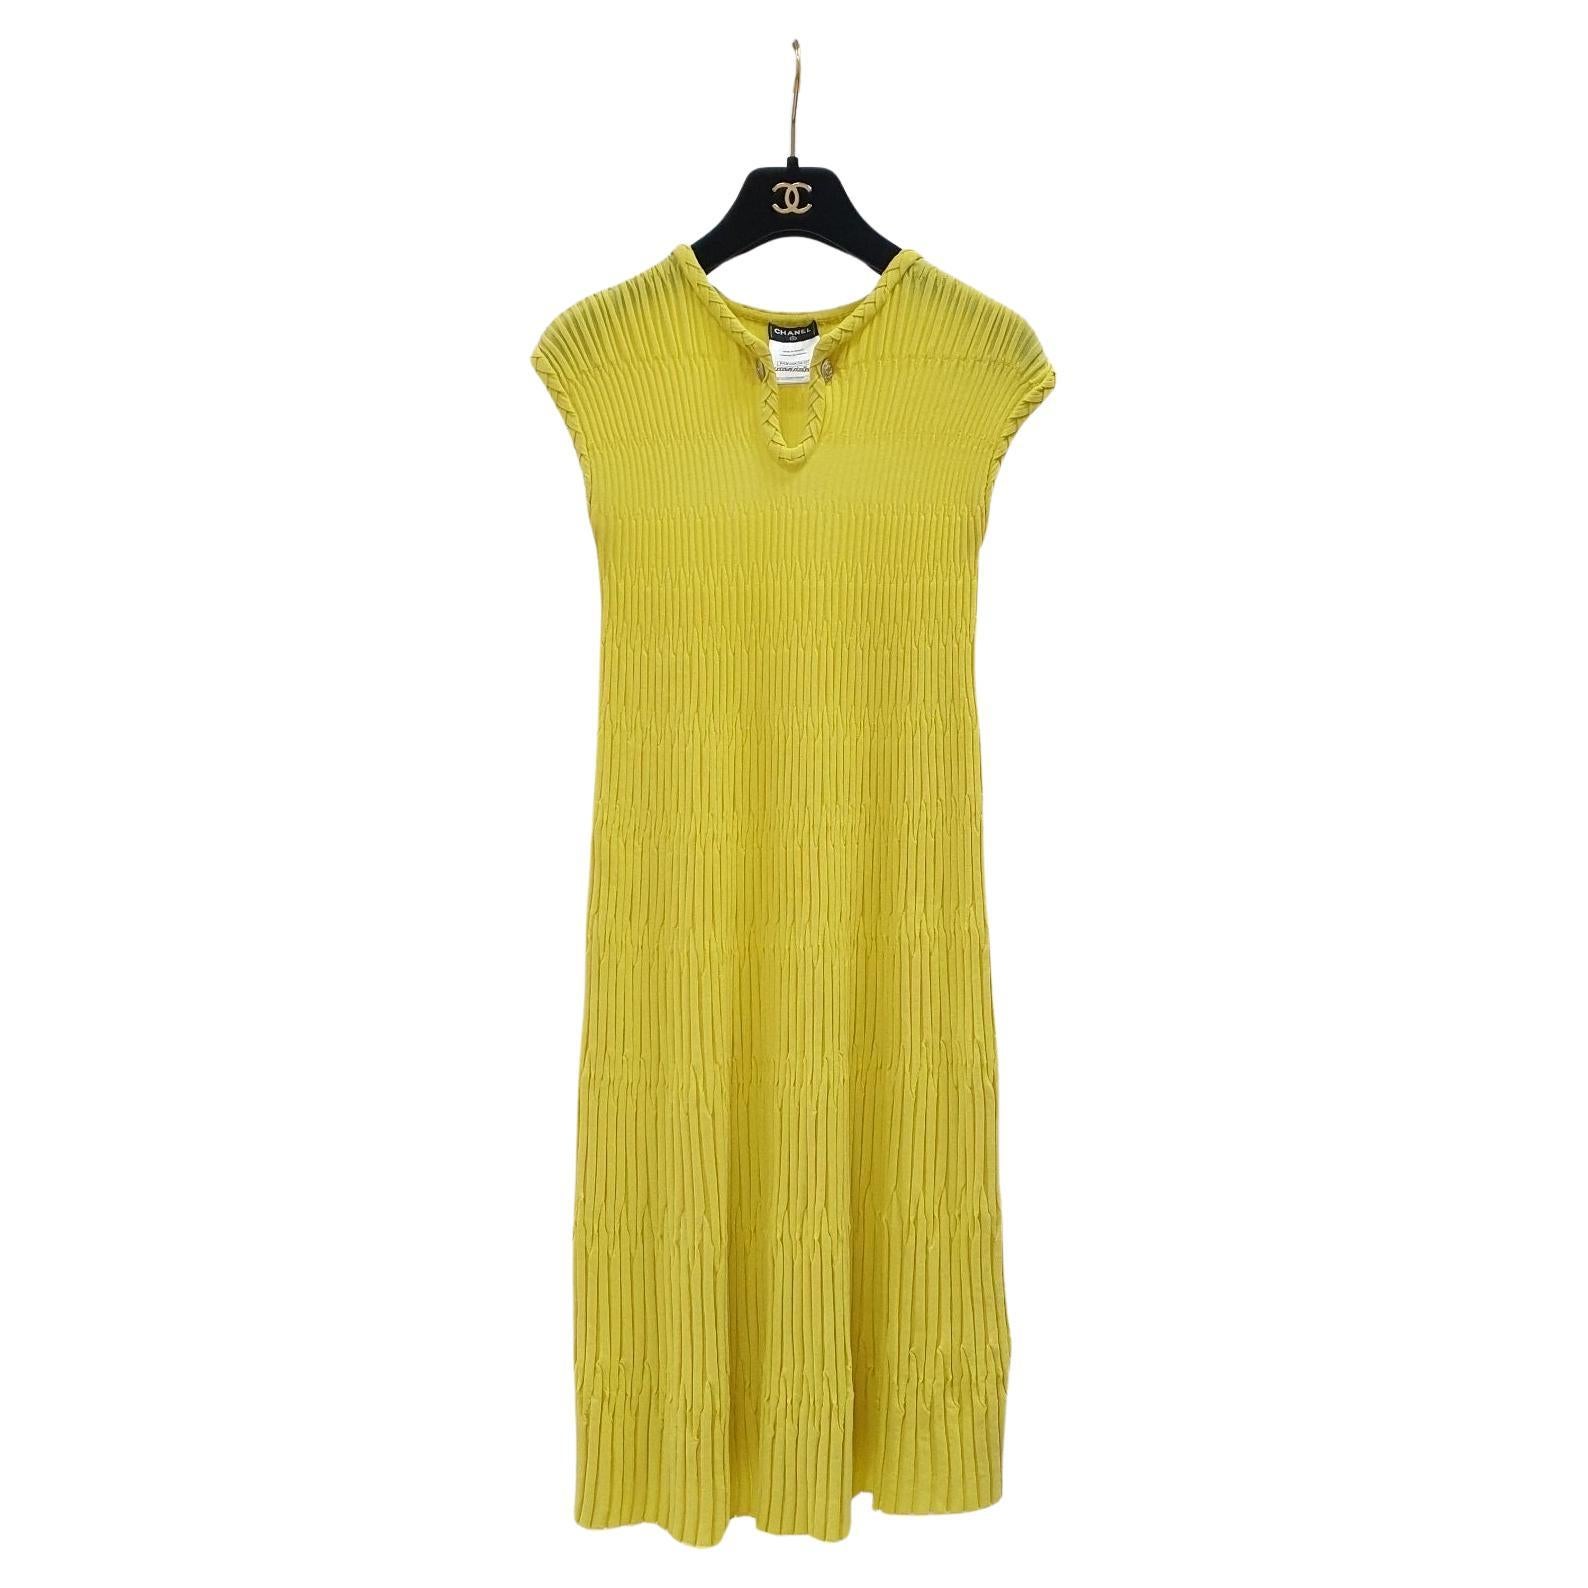 CHANEL Yellow Textured Cotton Jacquard Knit Sleeveless Dress For Sale